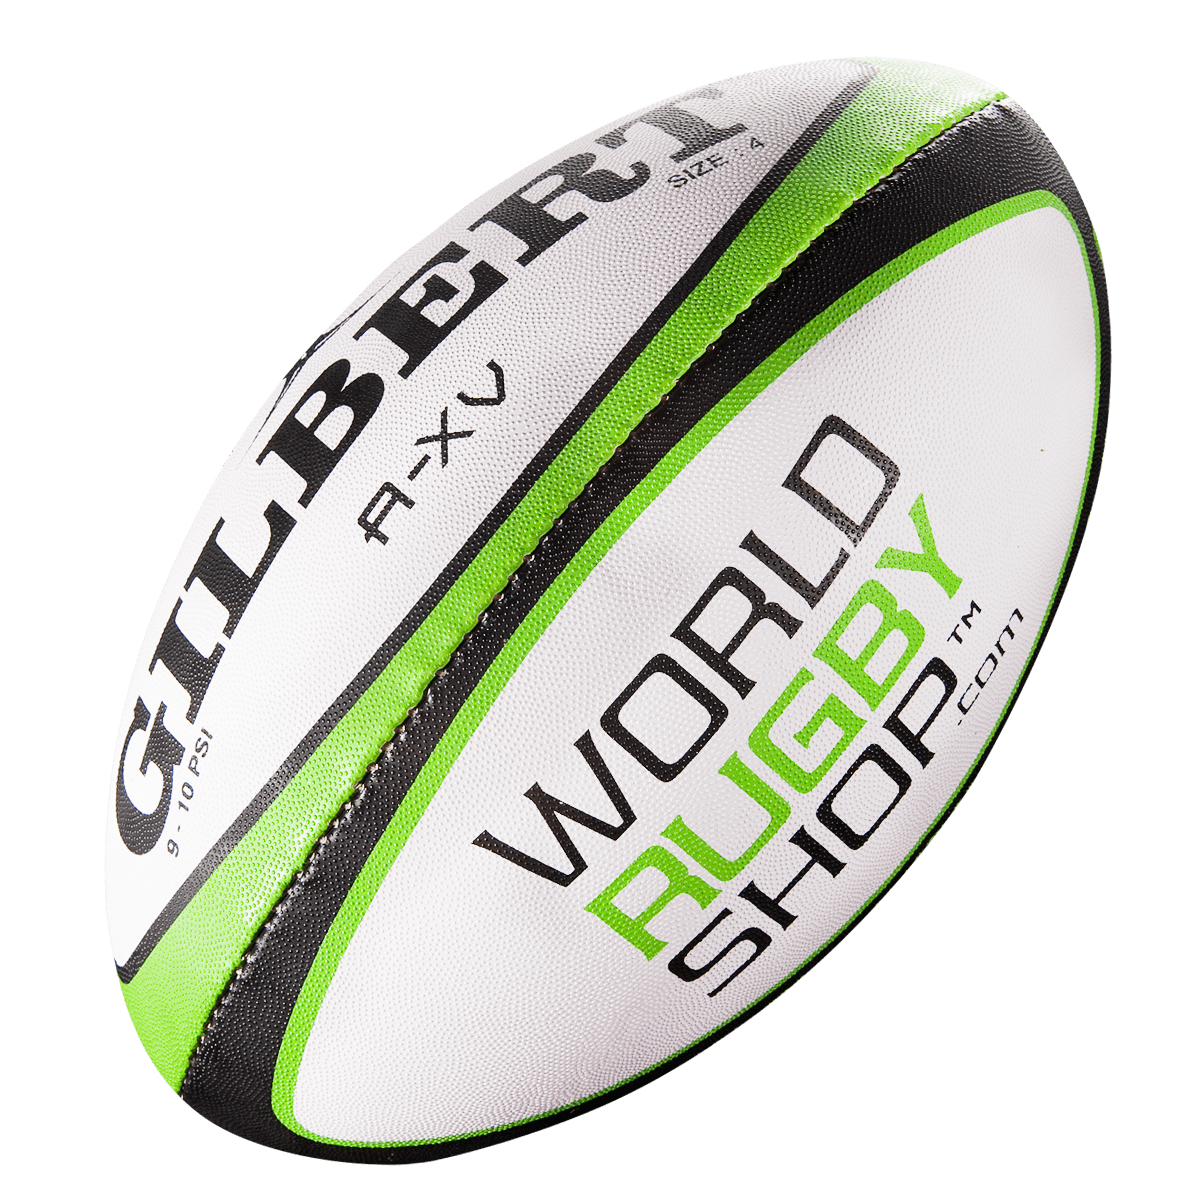 Evolution of the Gilbert Rugby Ball